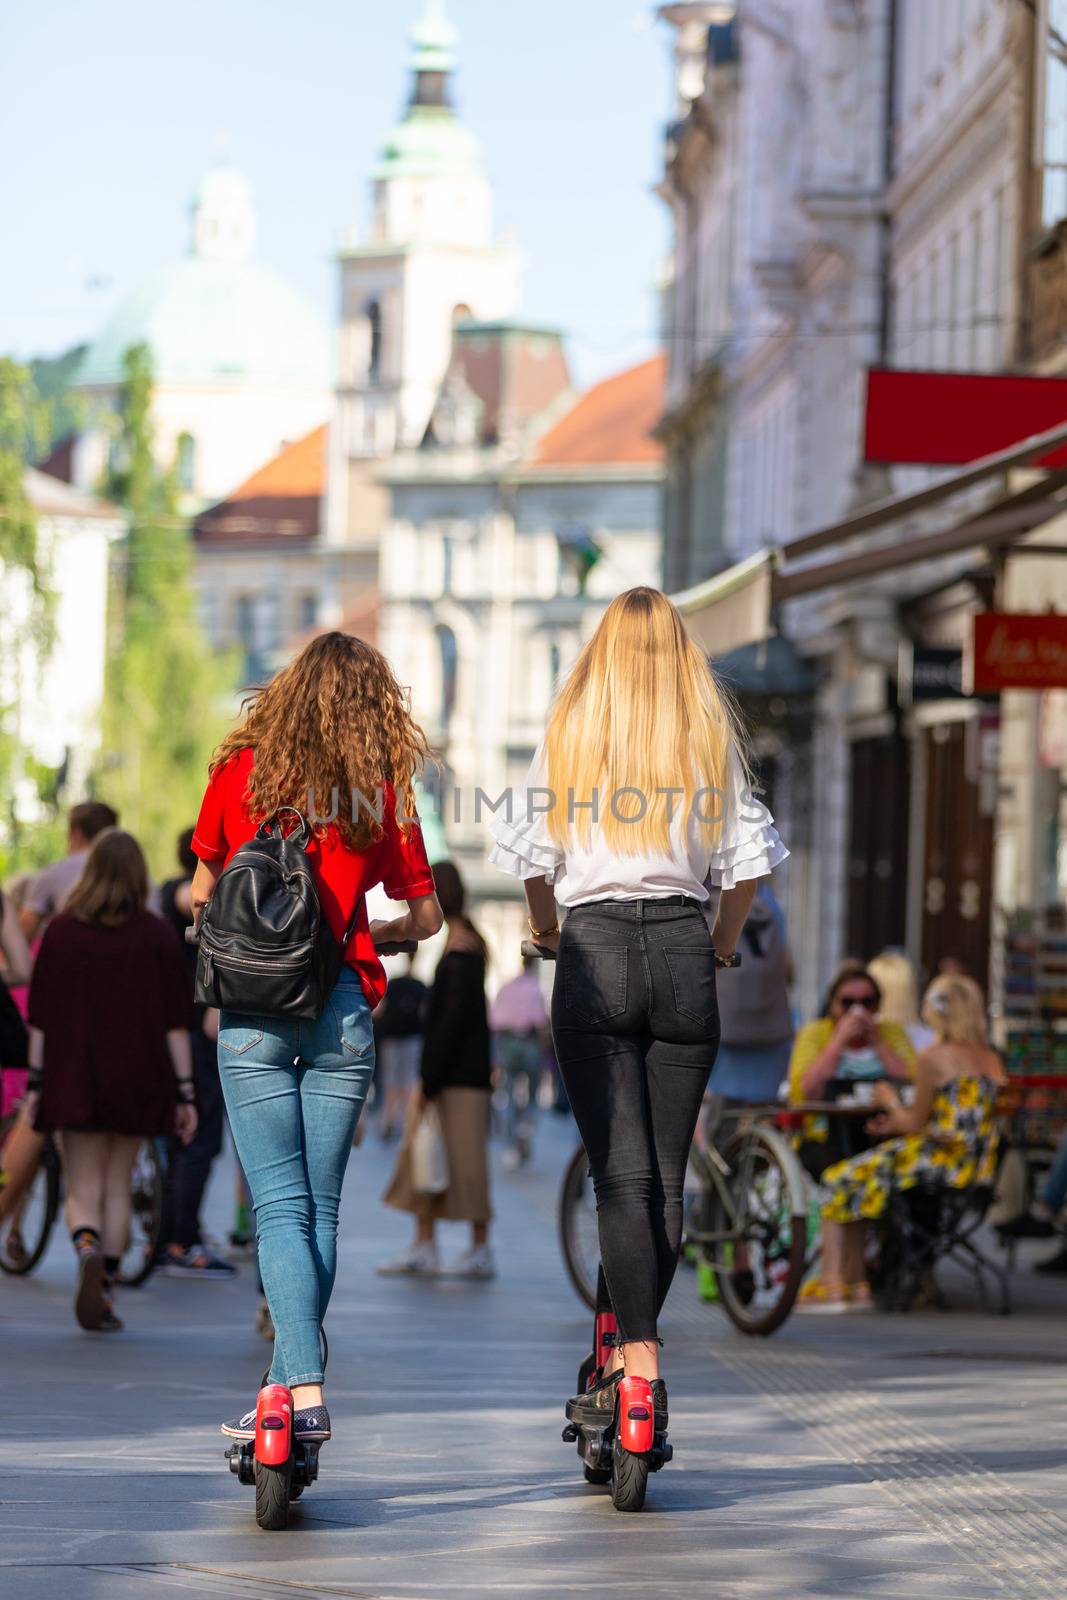 Rear view of trendy fashinable teenager girls riding public rental electric scooters in urban city environment. New eco-friendly modern public city transport in Ljubljana, Slovenia.